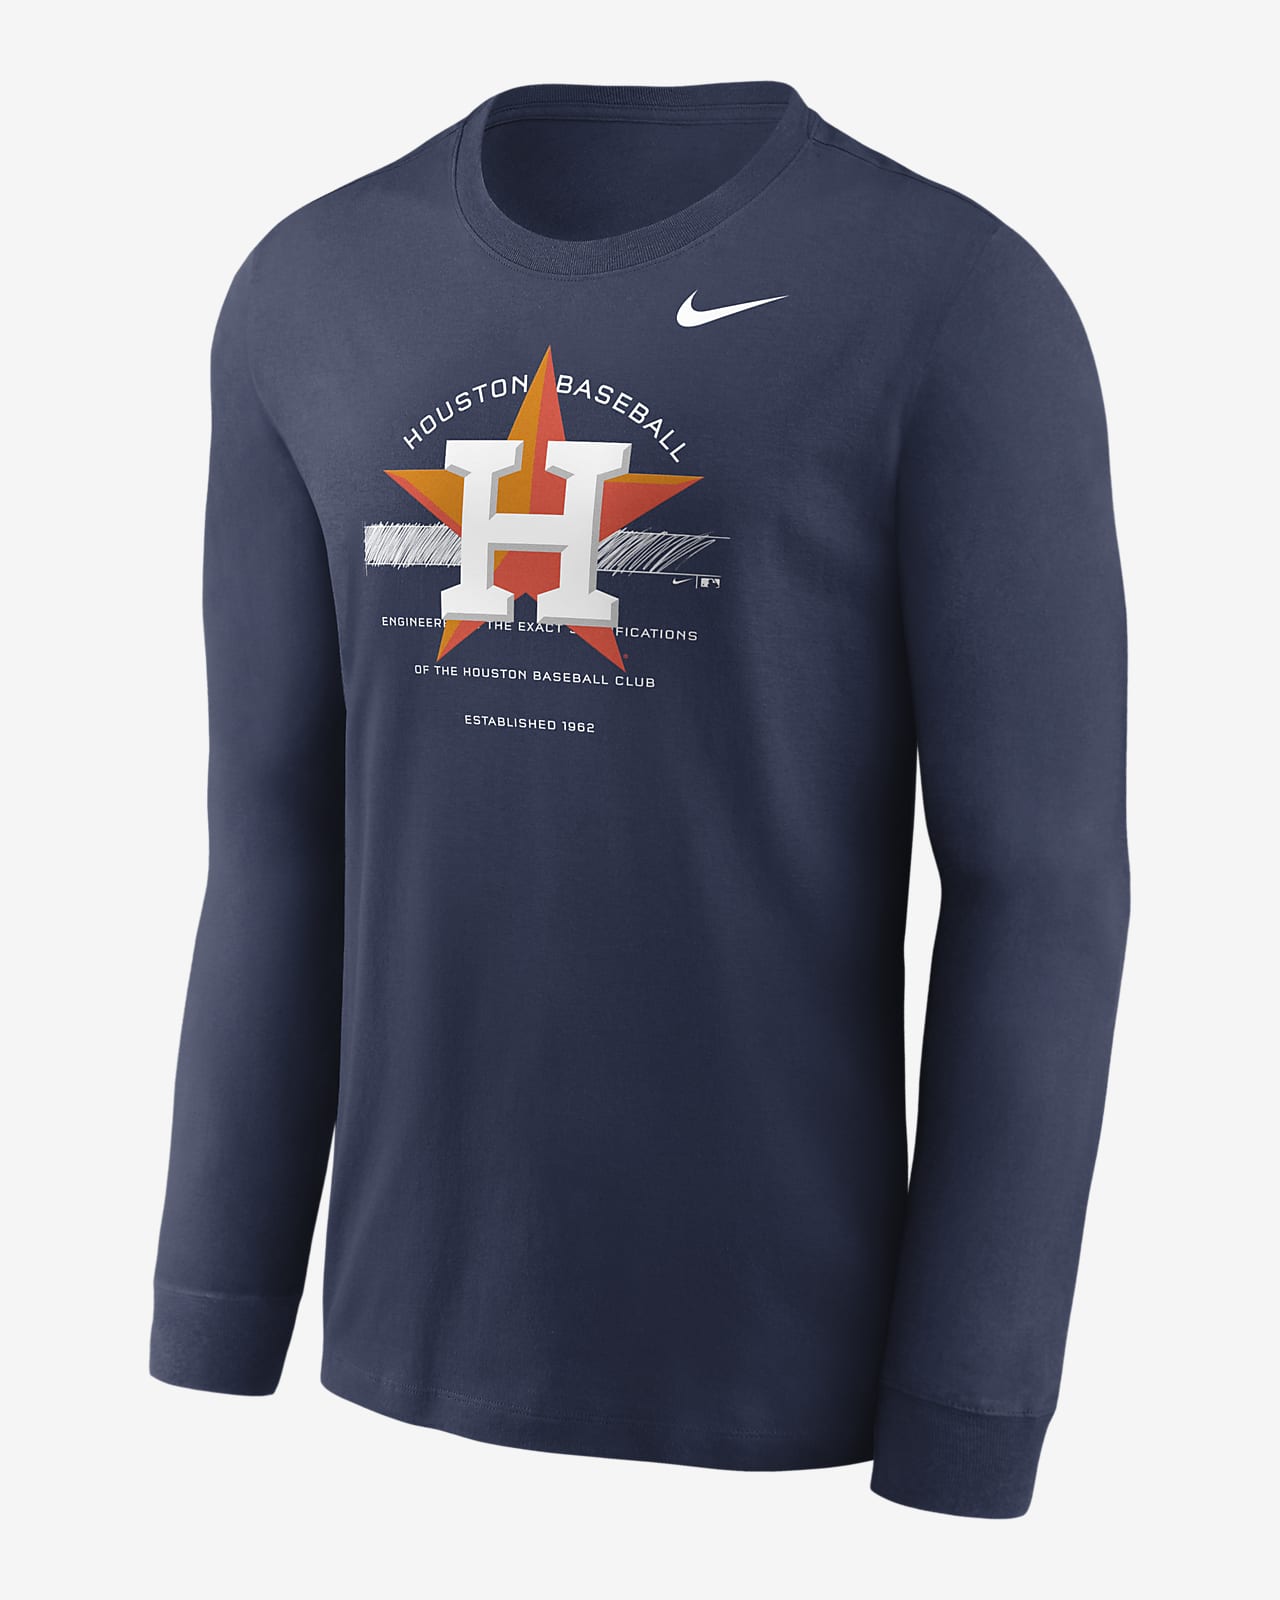 astros shirts and hats